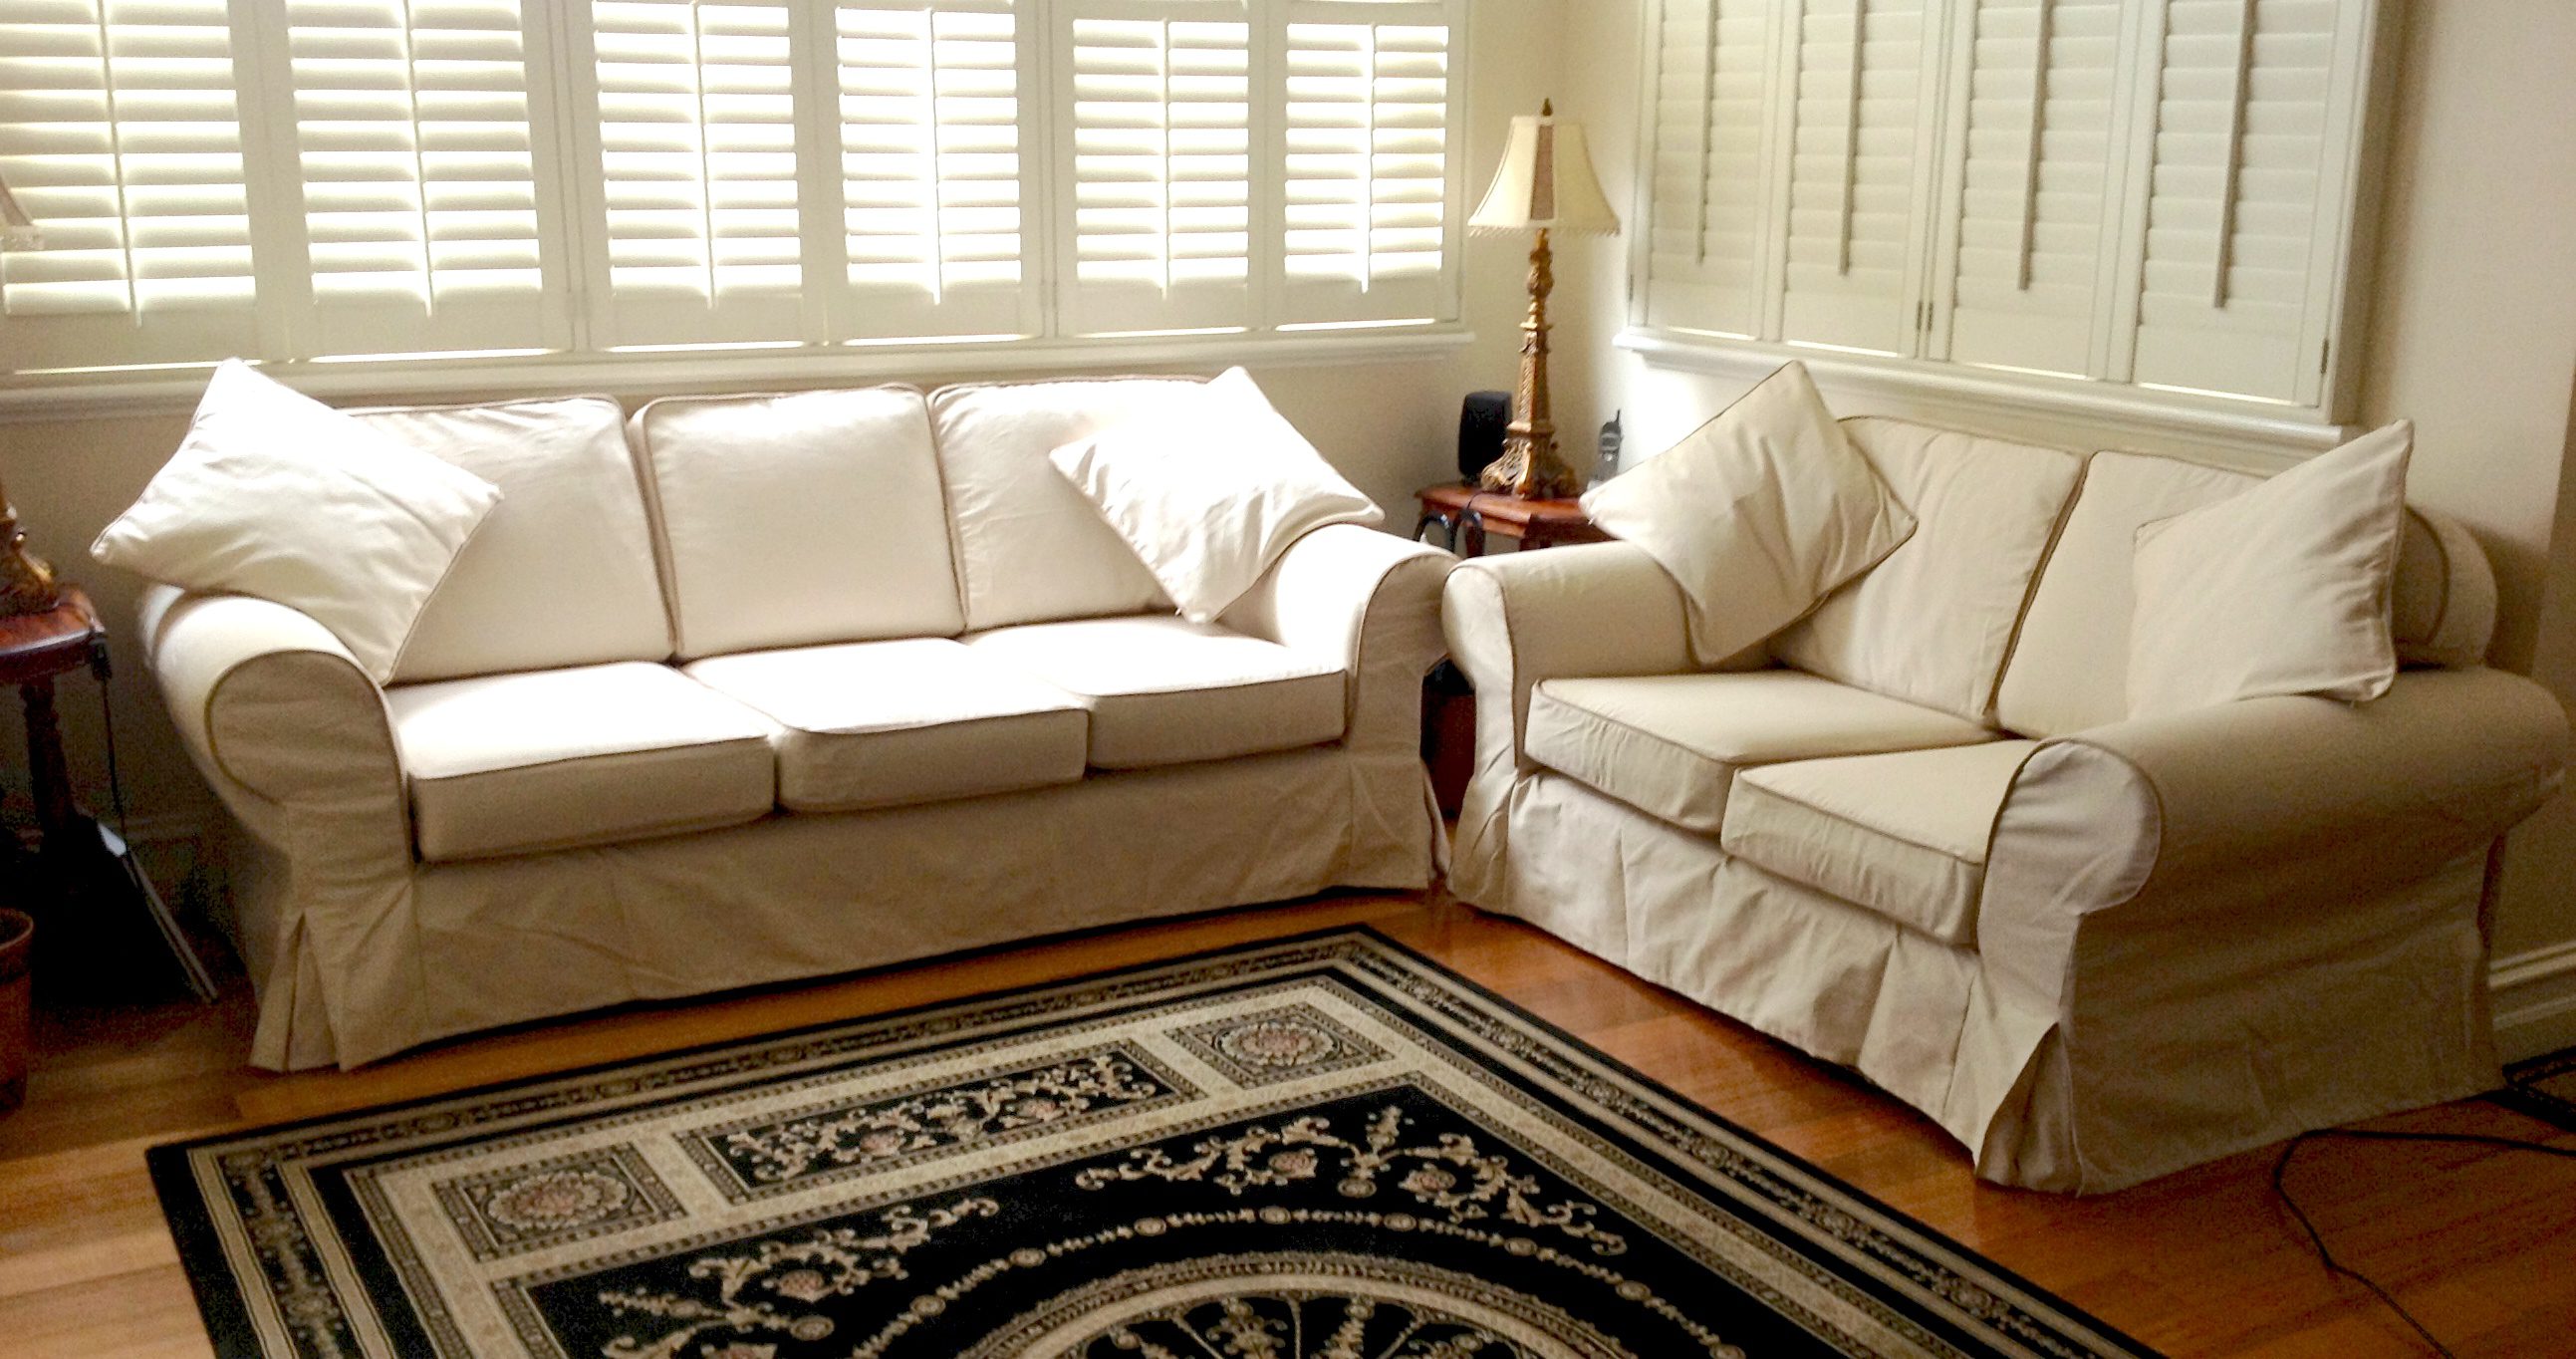 Custom Slipcovers And Couch Cover For, Leather Loveseat Couch Cover